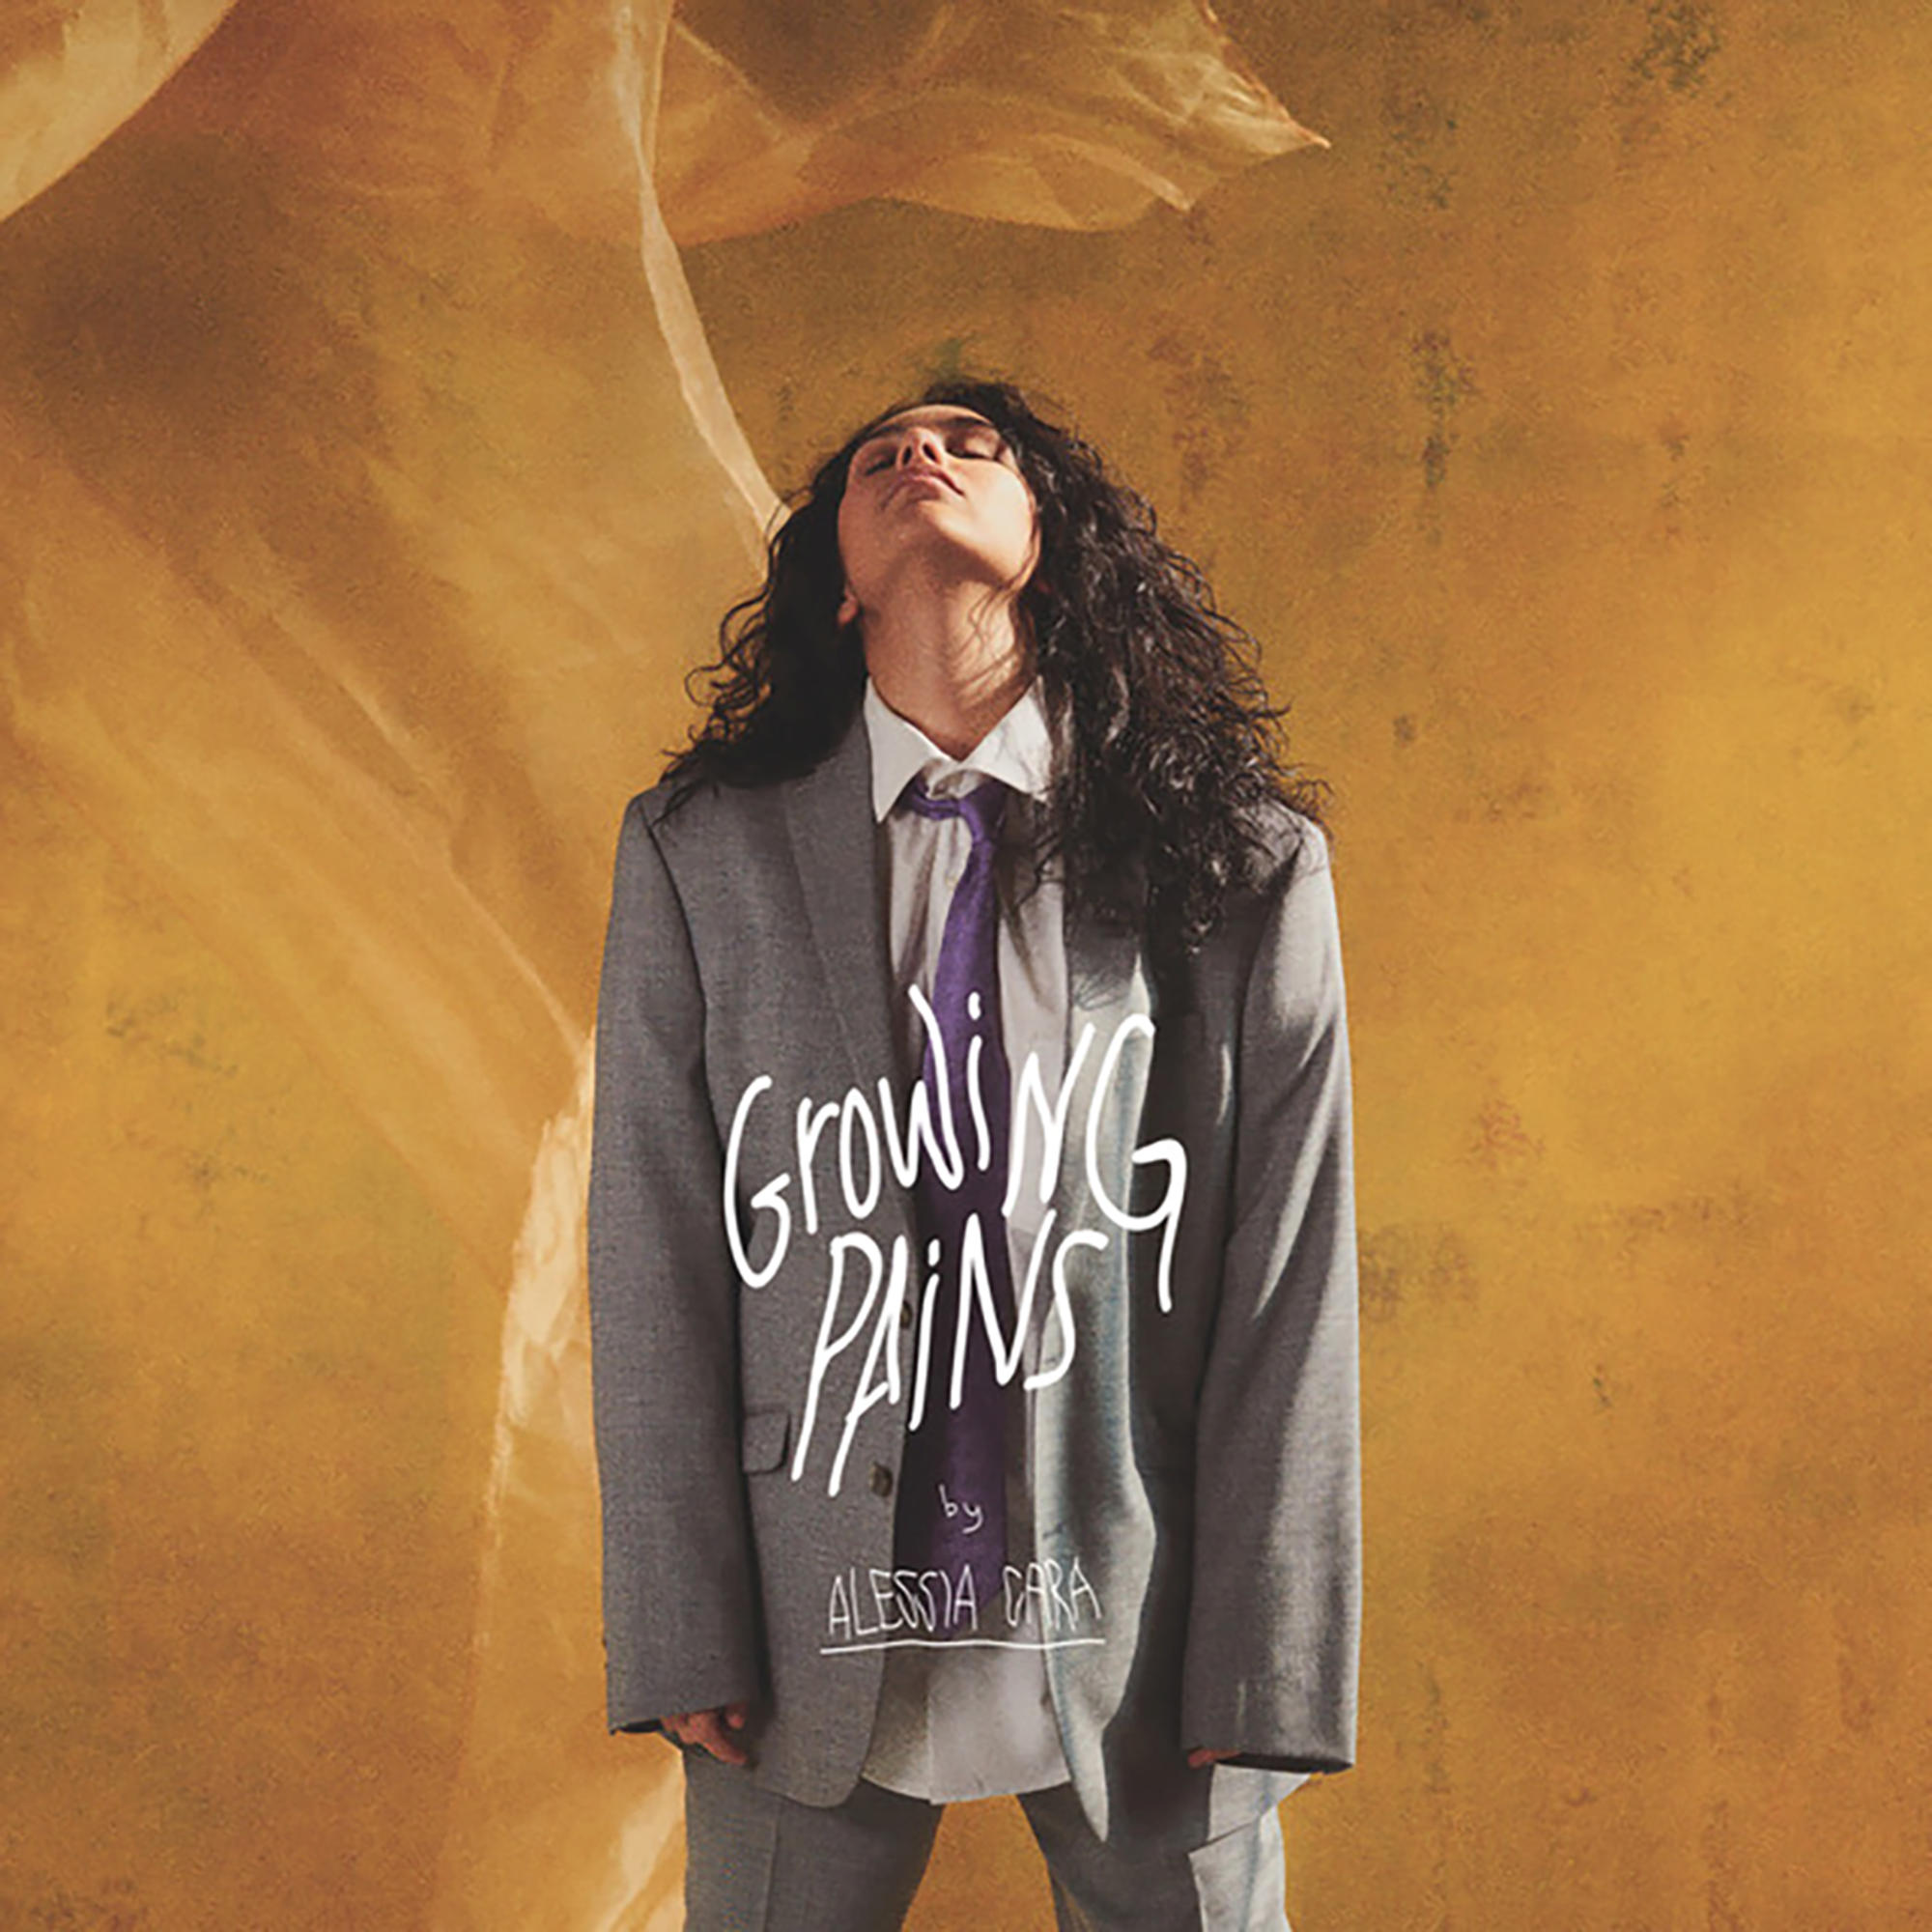 Alessia Cara - The og Growing (CD) Pains 